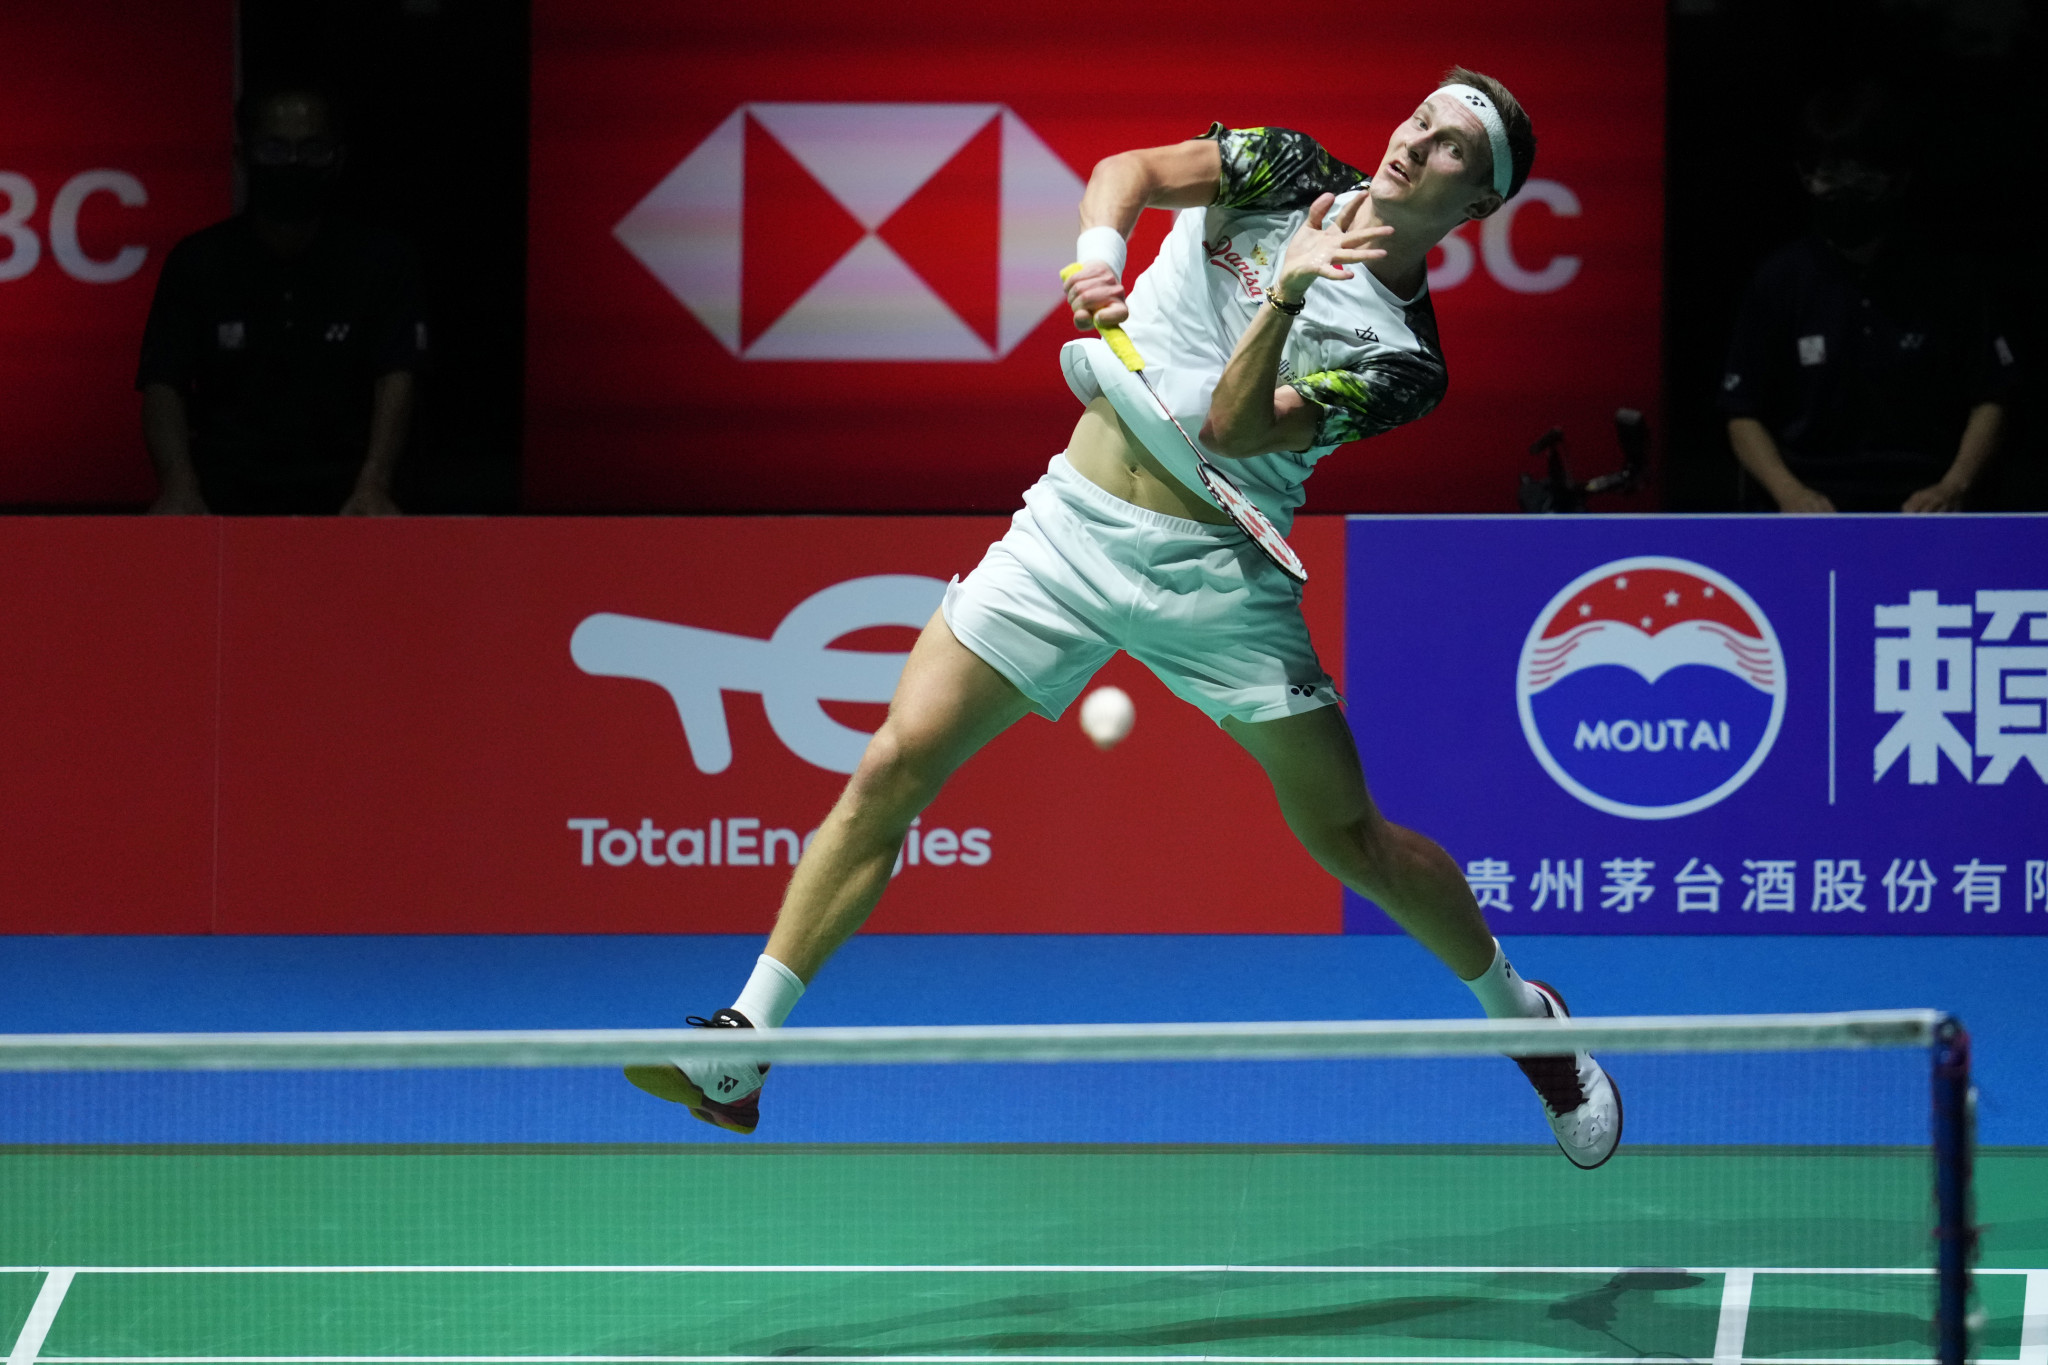 Top seed Viktor Axelsen of Denmark has reached the men's singles final at the BWF Malaysian Open ©Getty Images 